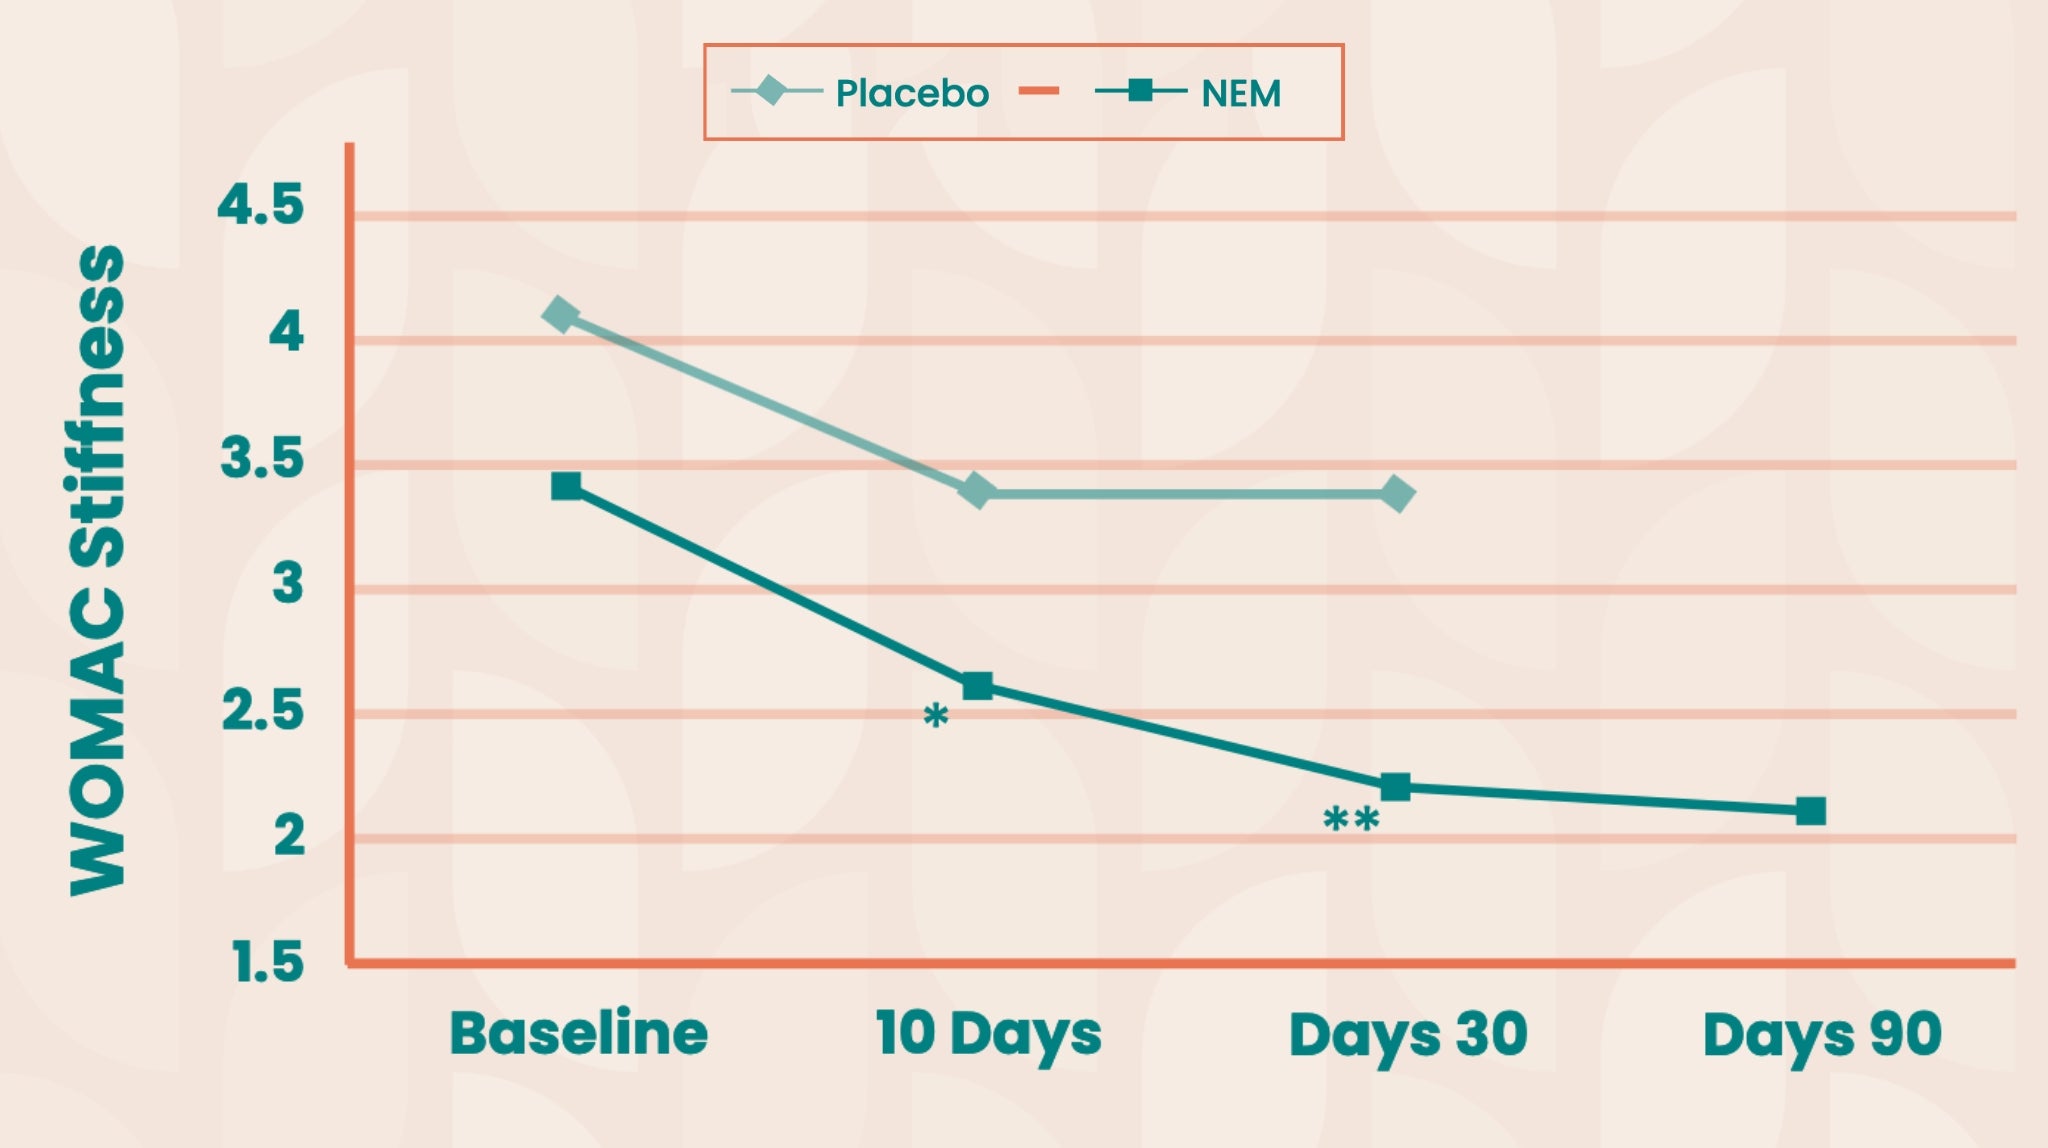 Line graph comparing WOMAC stiffness scores between Placebo and NEM over 90 days.